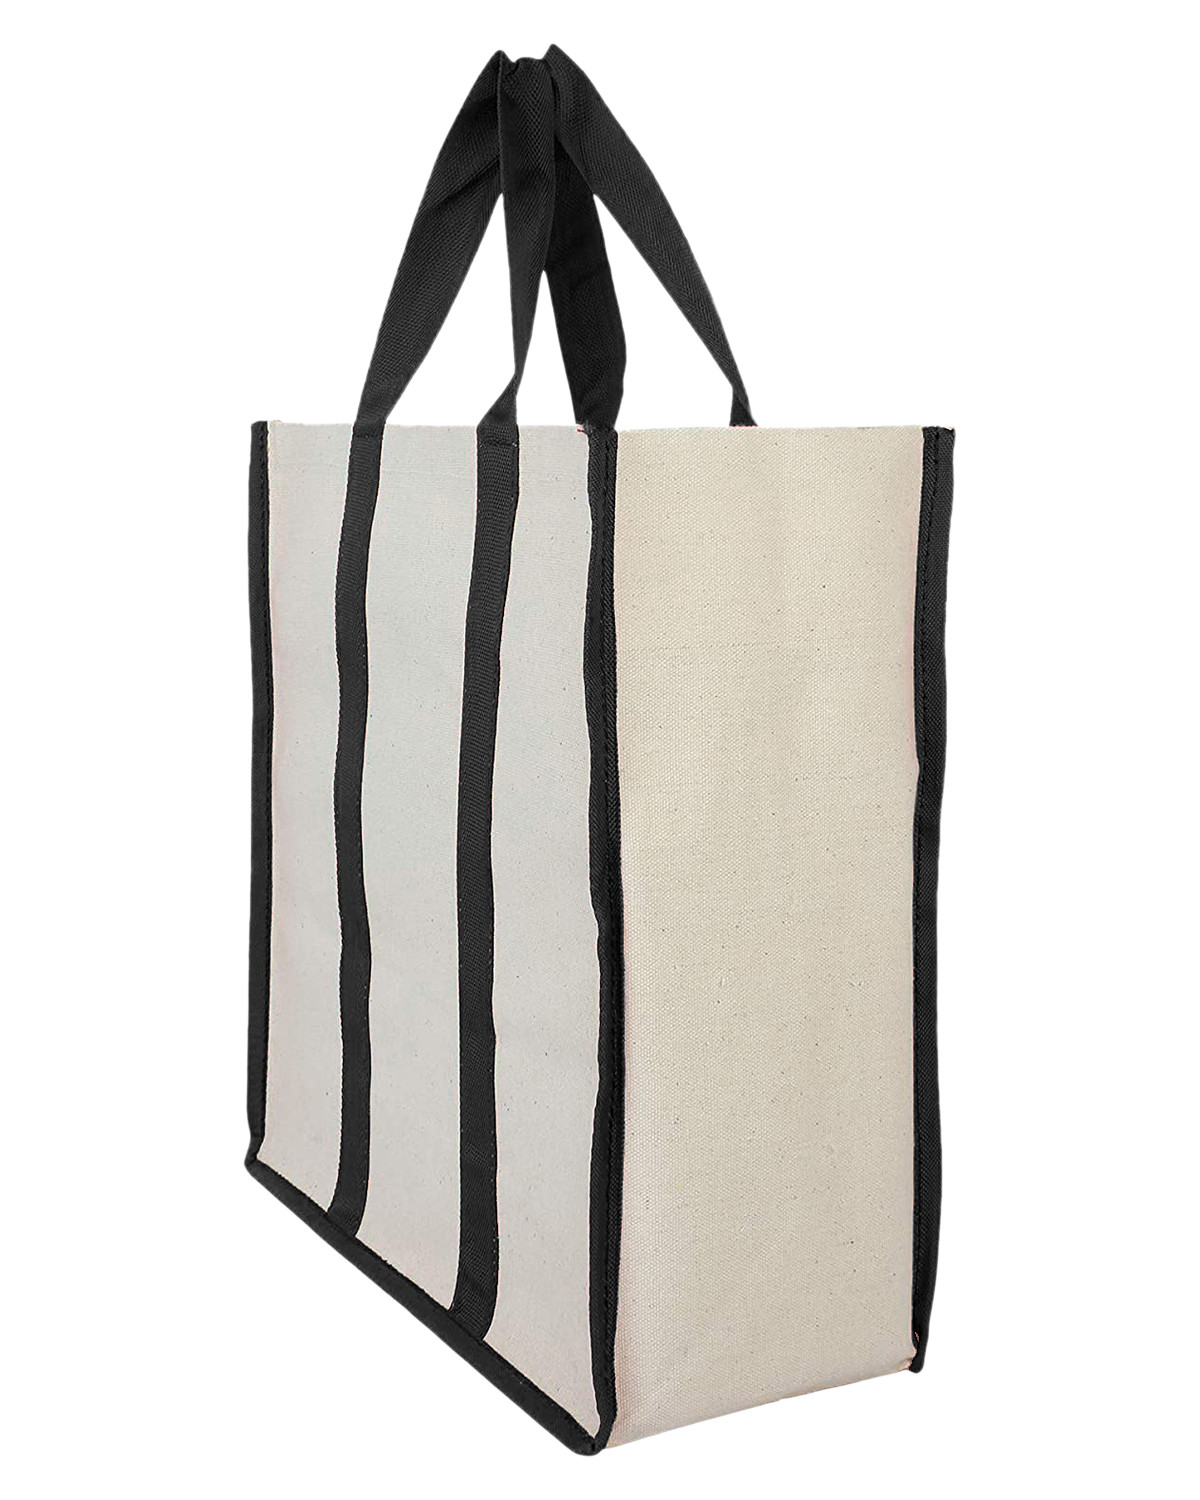 Kuber Industries Canvas Shopping Bags/Grocery Bag for Carry Grocery, Fruits, Vegetable with Handles (Black) 54KM4013